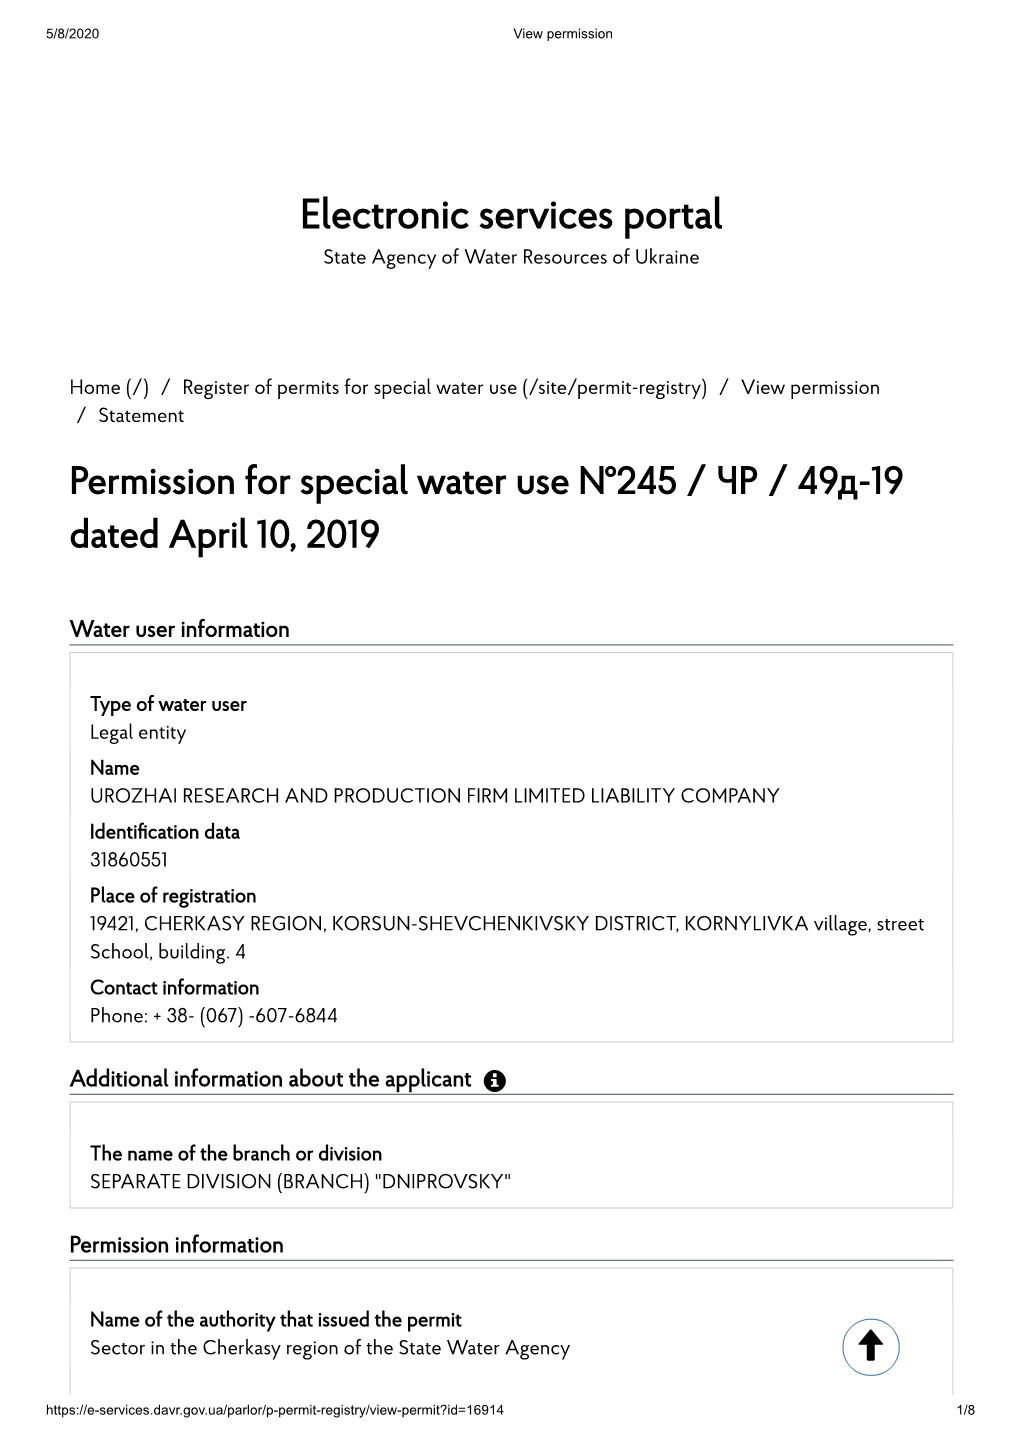 Electronic Services Portal State Agency of Water Resources of Ukraine